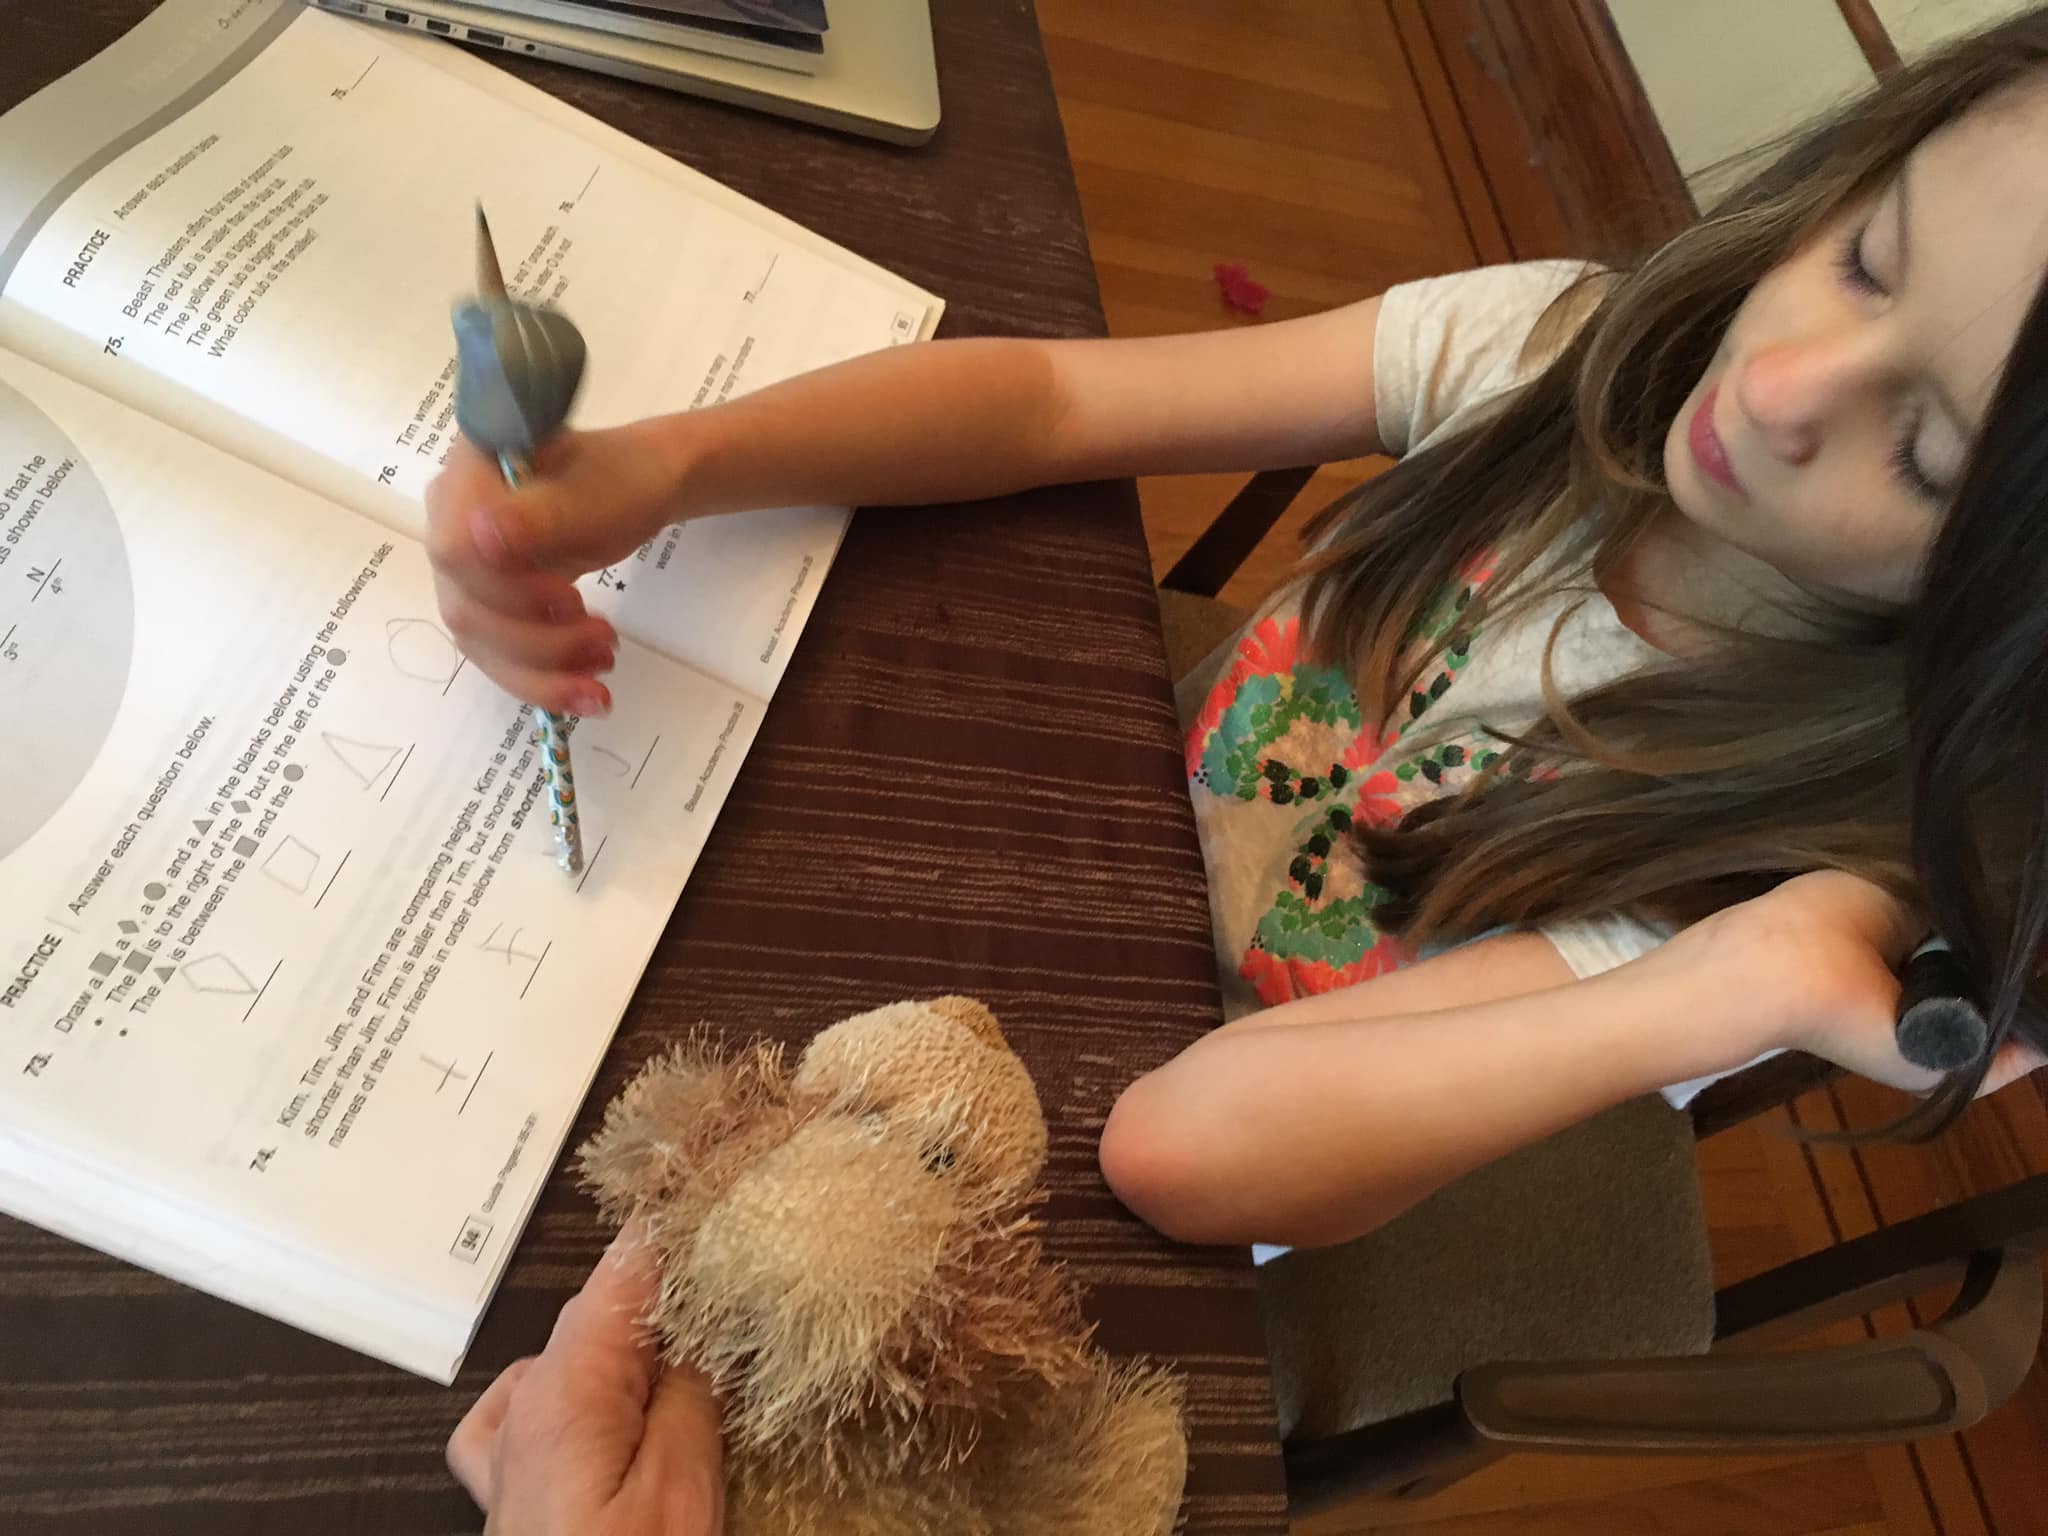 Wanda, seven years old, explaining a math problem to Tom the Dog, a small stuffed animal.